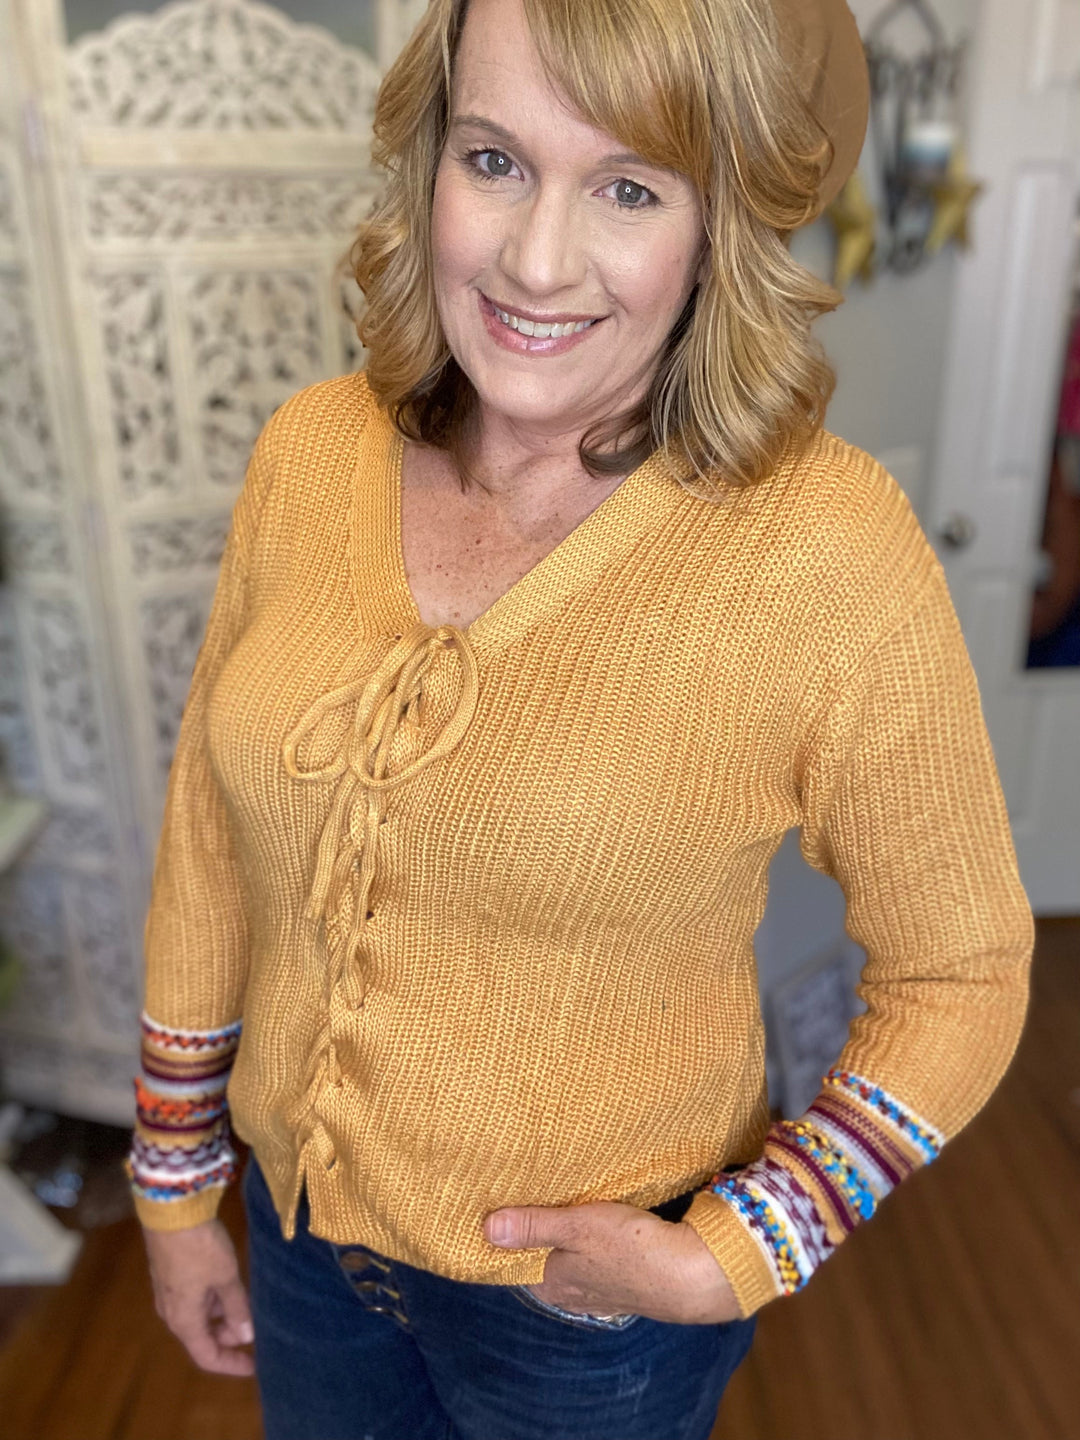 Yellow Lace Up V Neck Knit Sweater-Sweaters-The Bee Chic Boutique-[option4]-[option5]-[option6]-[option7]-[option8]-Shop-Boutique-Clothing-for-Women-Online